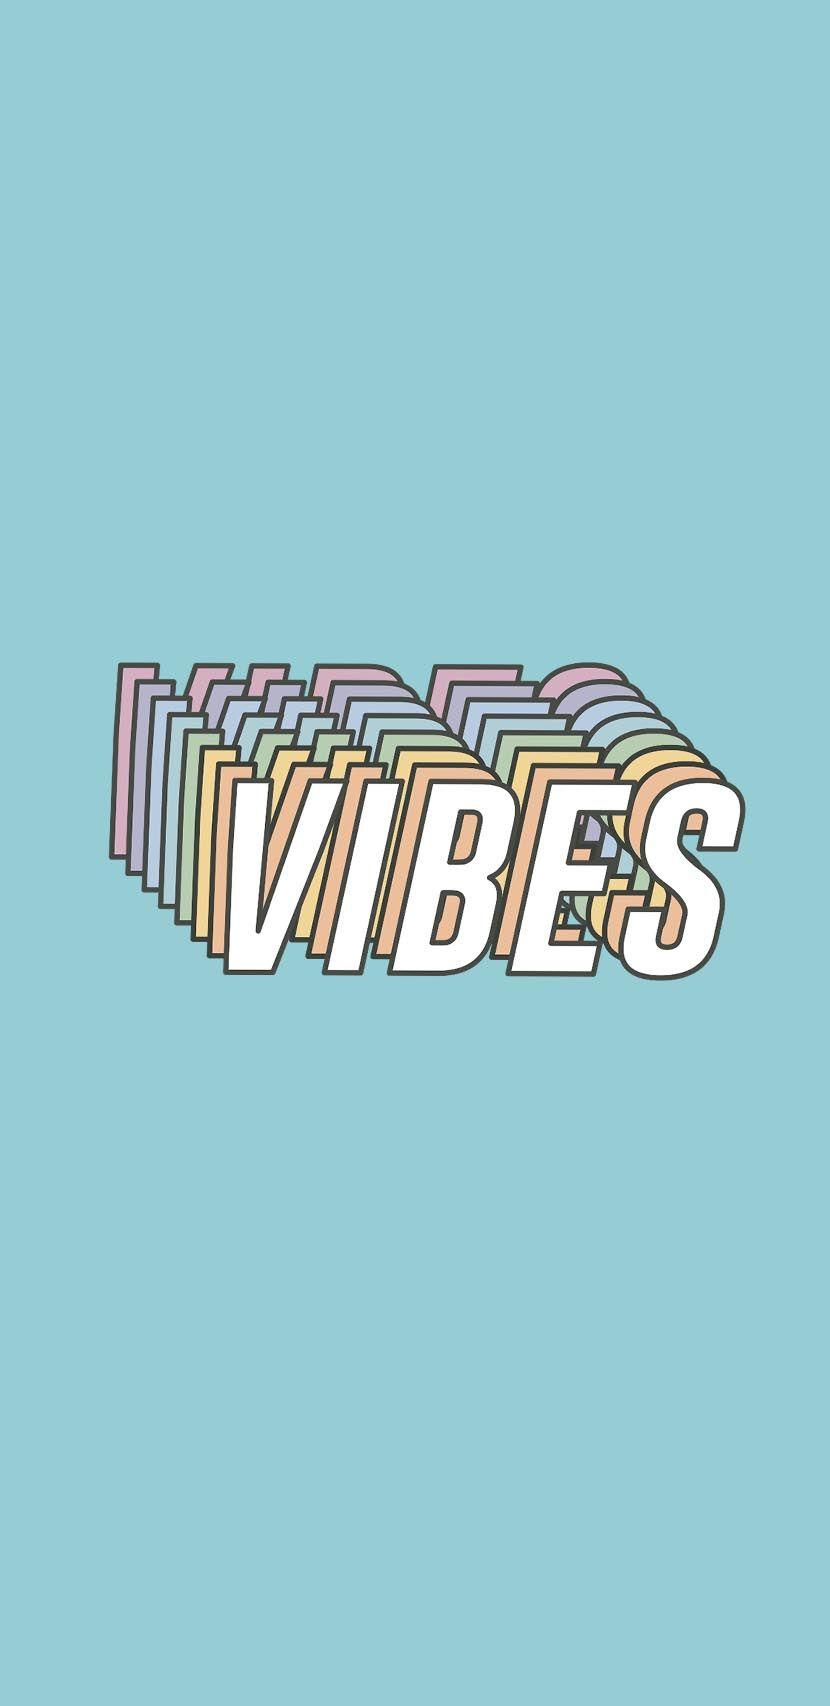 vibes, beach vibes, good vibes, motivational quote, quote